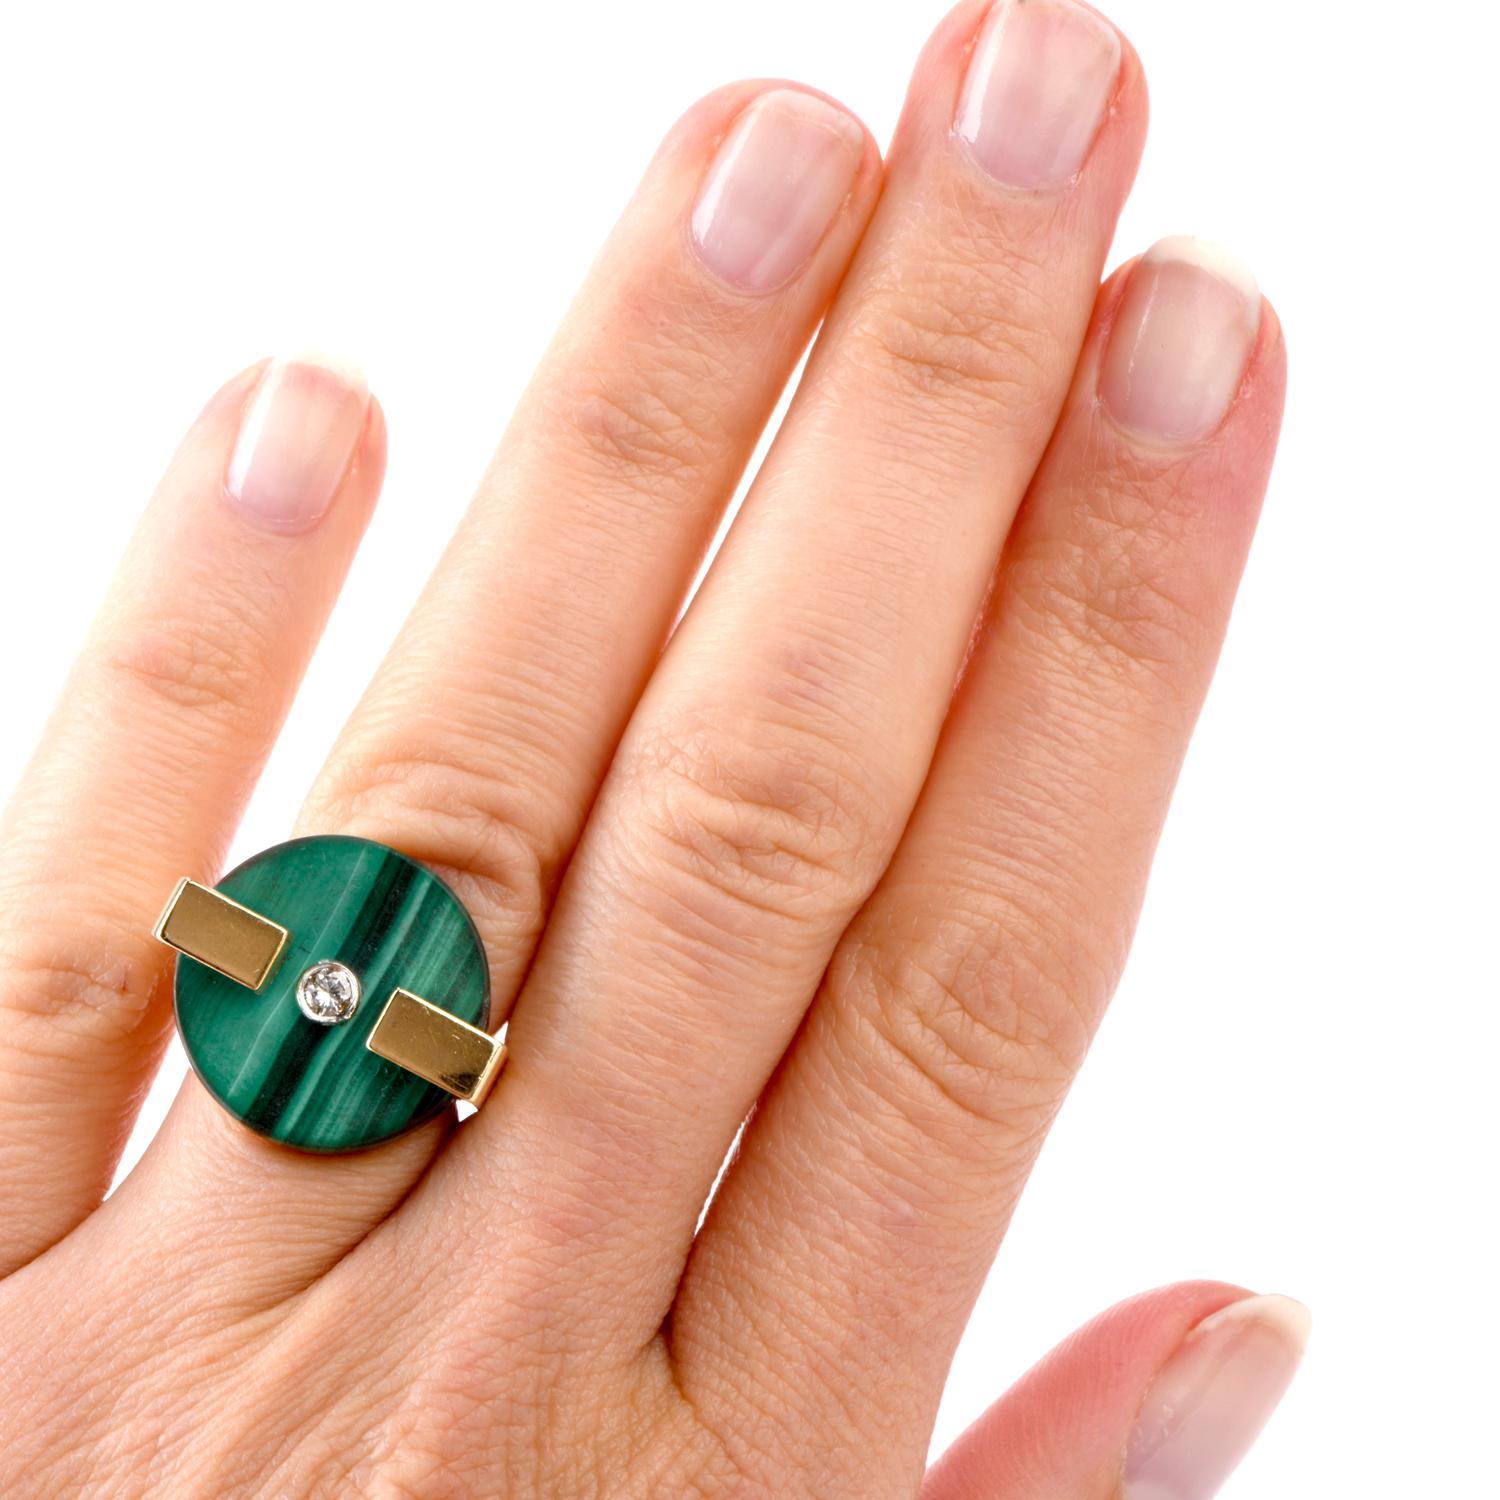 Like Shapes and Dimension? This vintage 1970's ring is for you! Featuring a thick Round disc of Malachite measuring appx. 19mm in diameter

and 3.74mm deep, this Square shaped ring was crafted in 18K yellow gold. Contrasting the green disc is 1